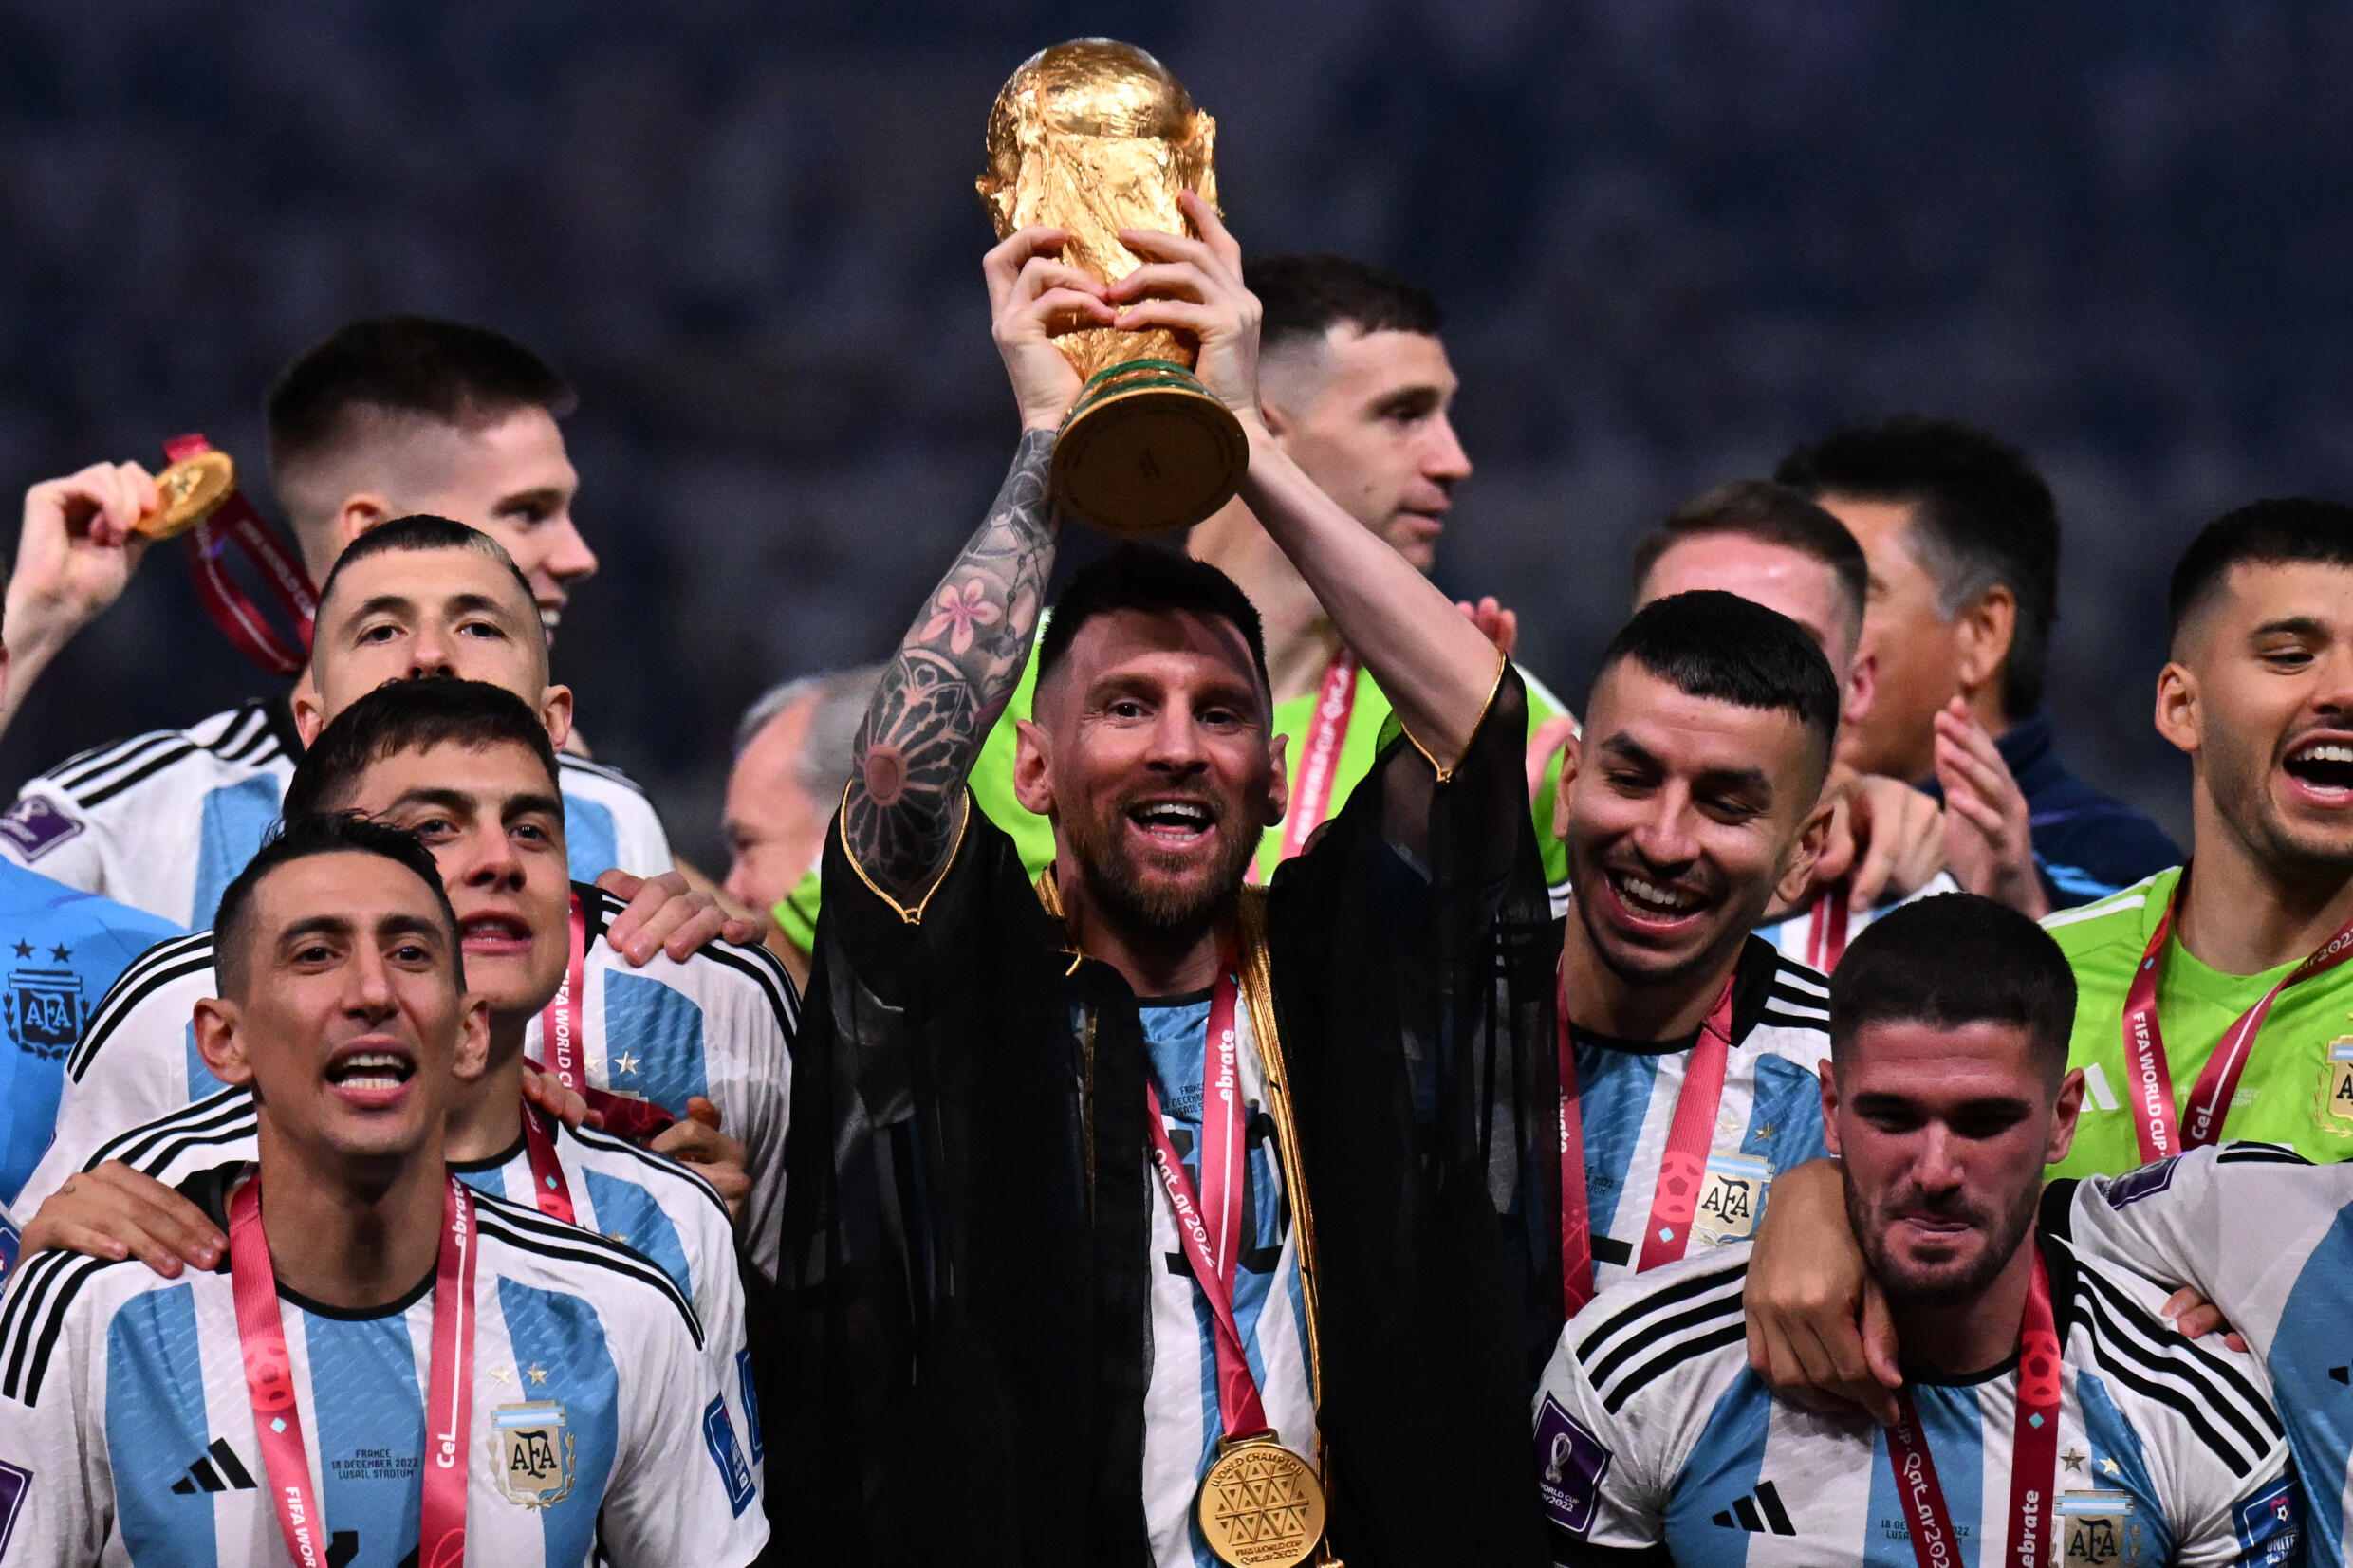 Argentine player Lionel Messi (c), surrounded by his teammates, lifts the FIFA World Cup won by Argentina against France on penalties, on December 18, 2022 at Lusail Stadium, Qatar